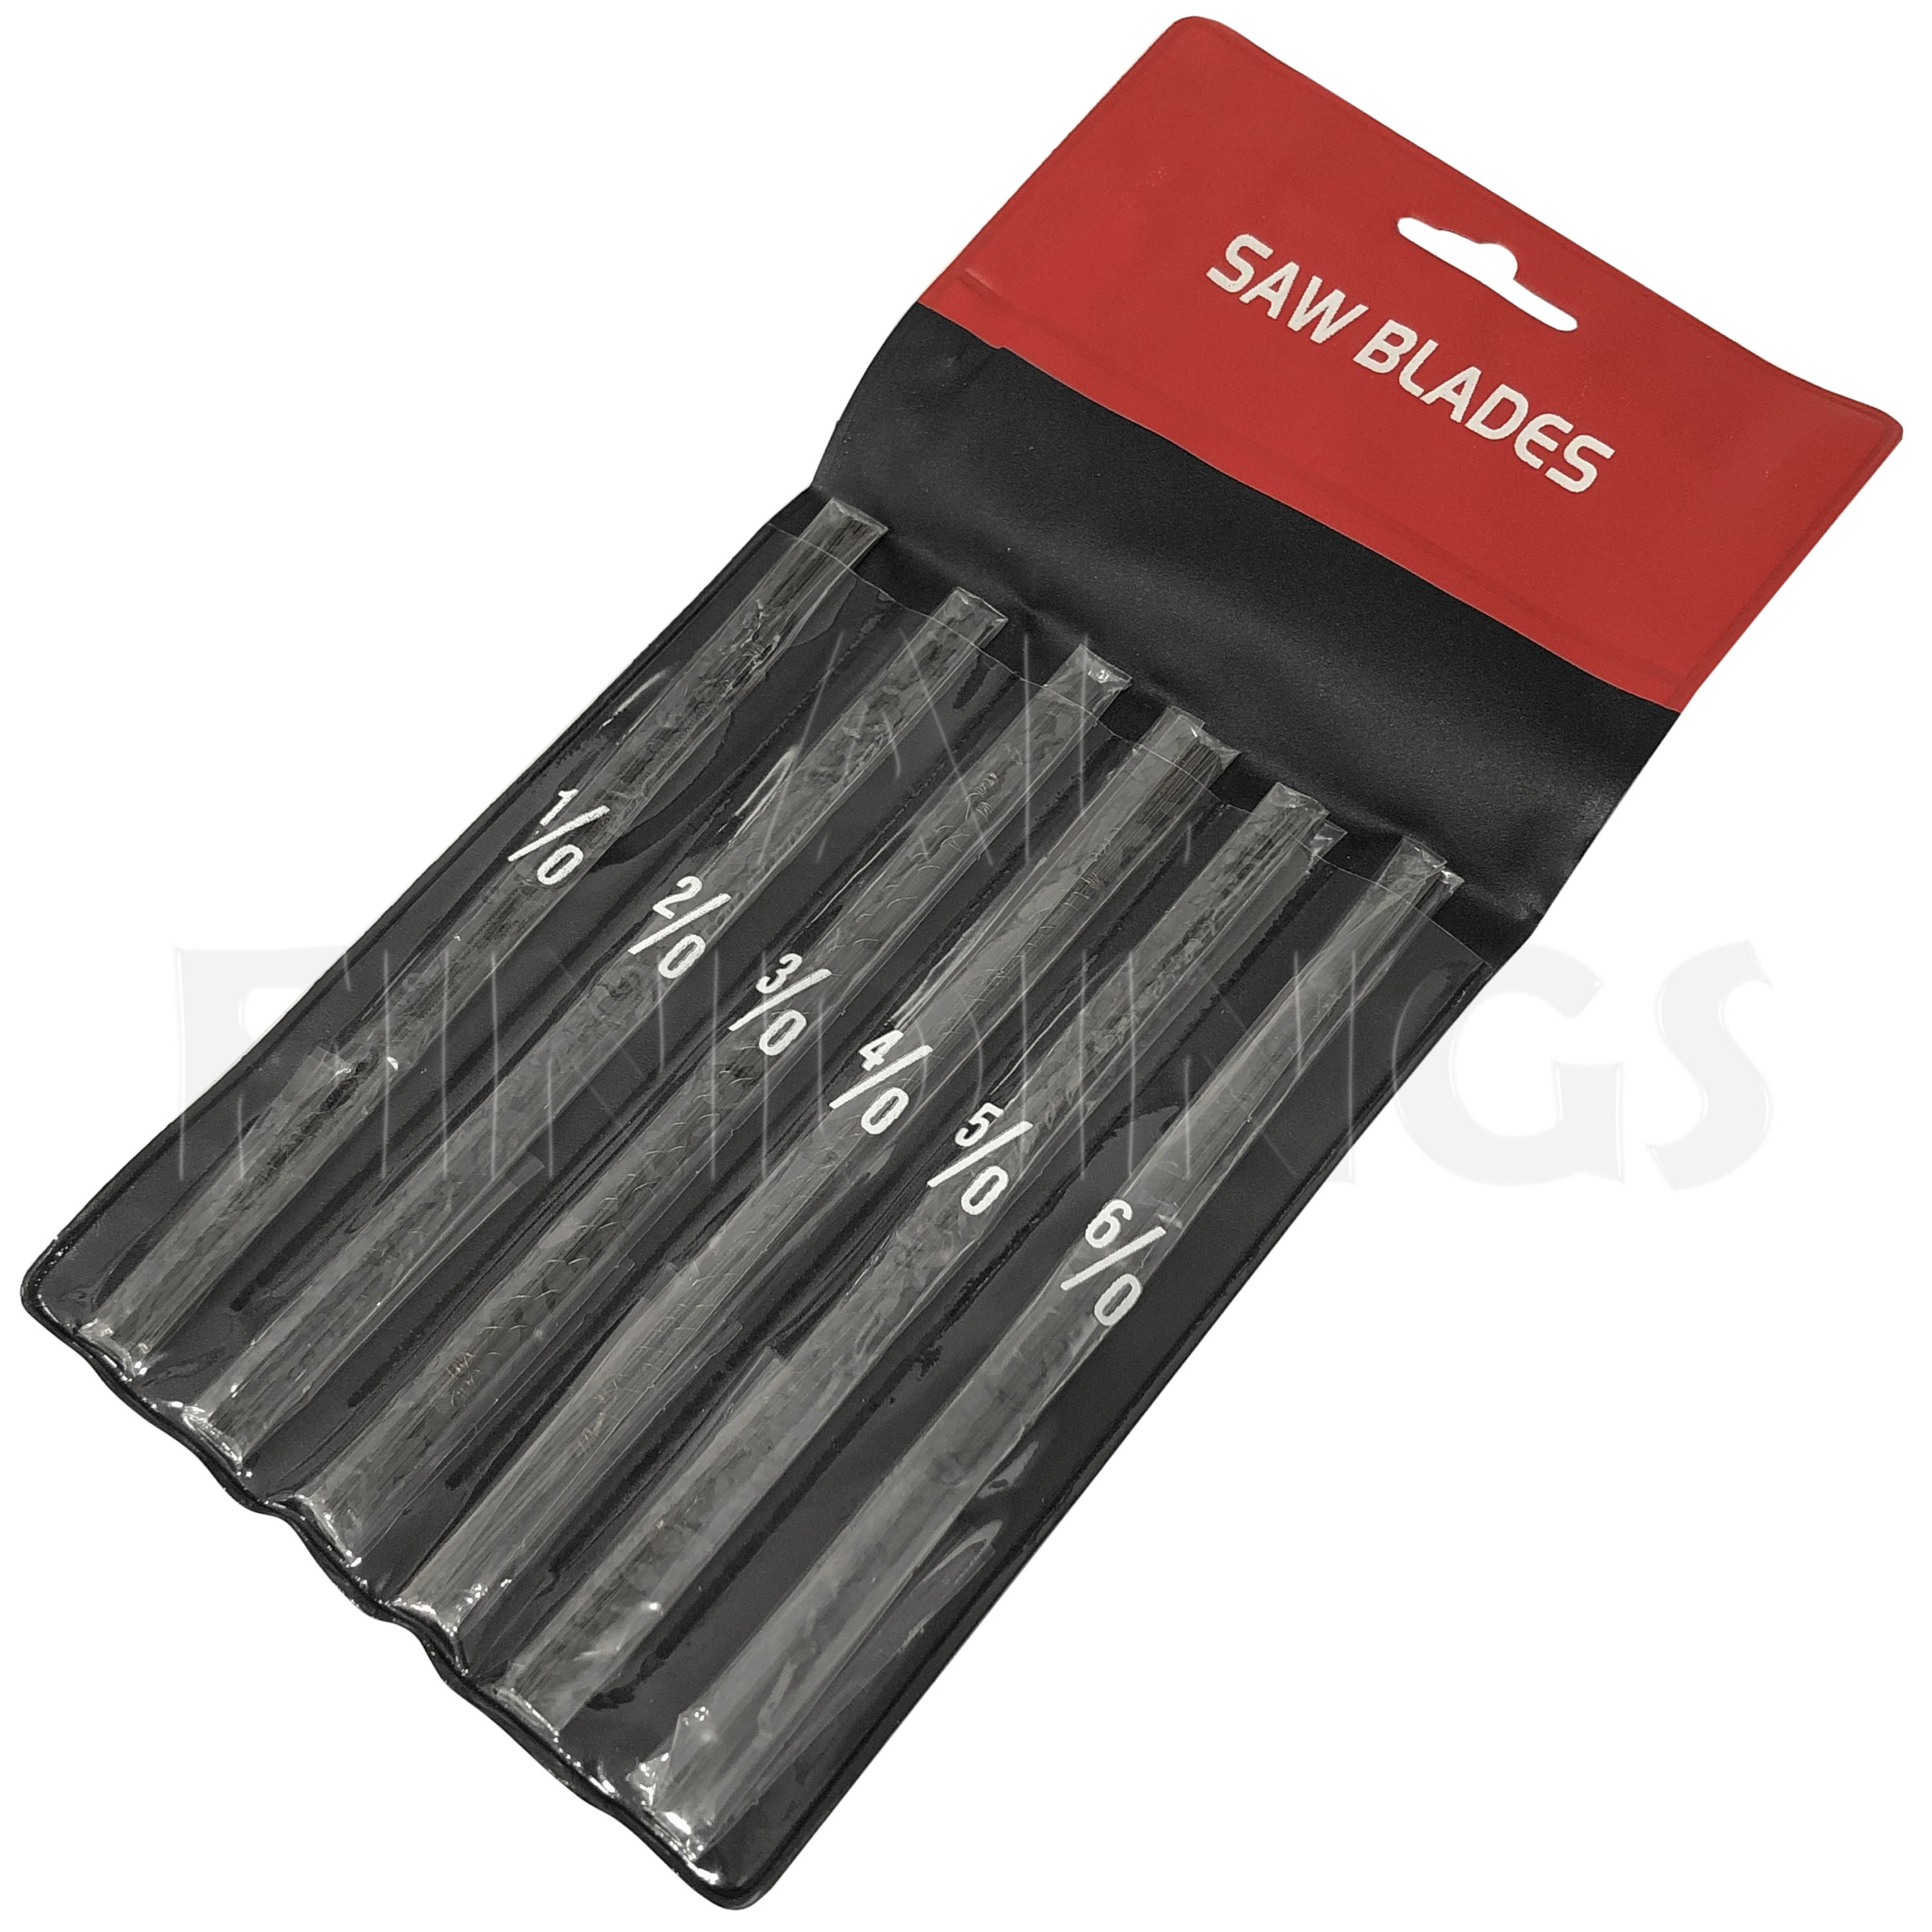 Antilope Jewelers Saw Blades #1 Jewelry Making Pack of 144 PCS. Made in Germany, Women's, Size: One Size